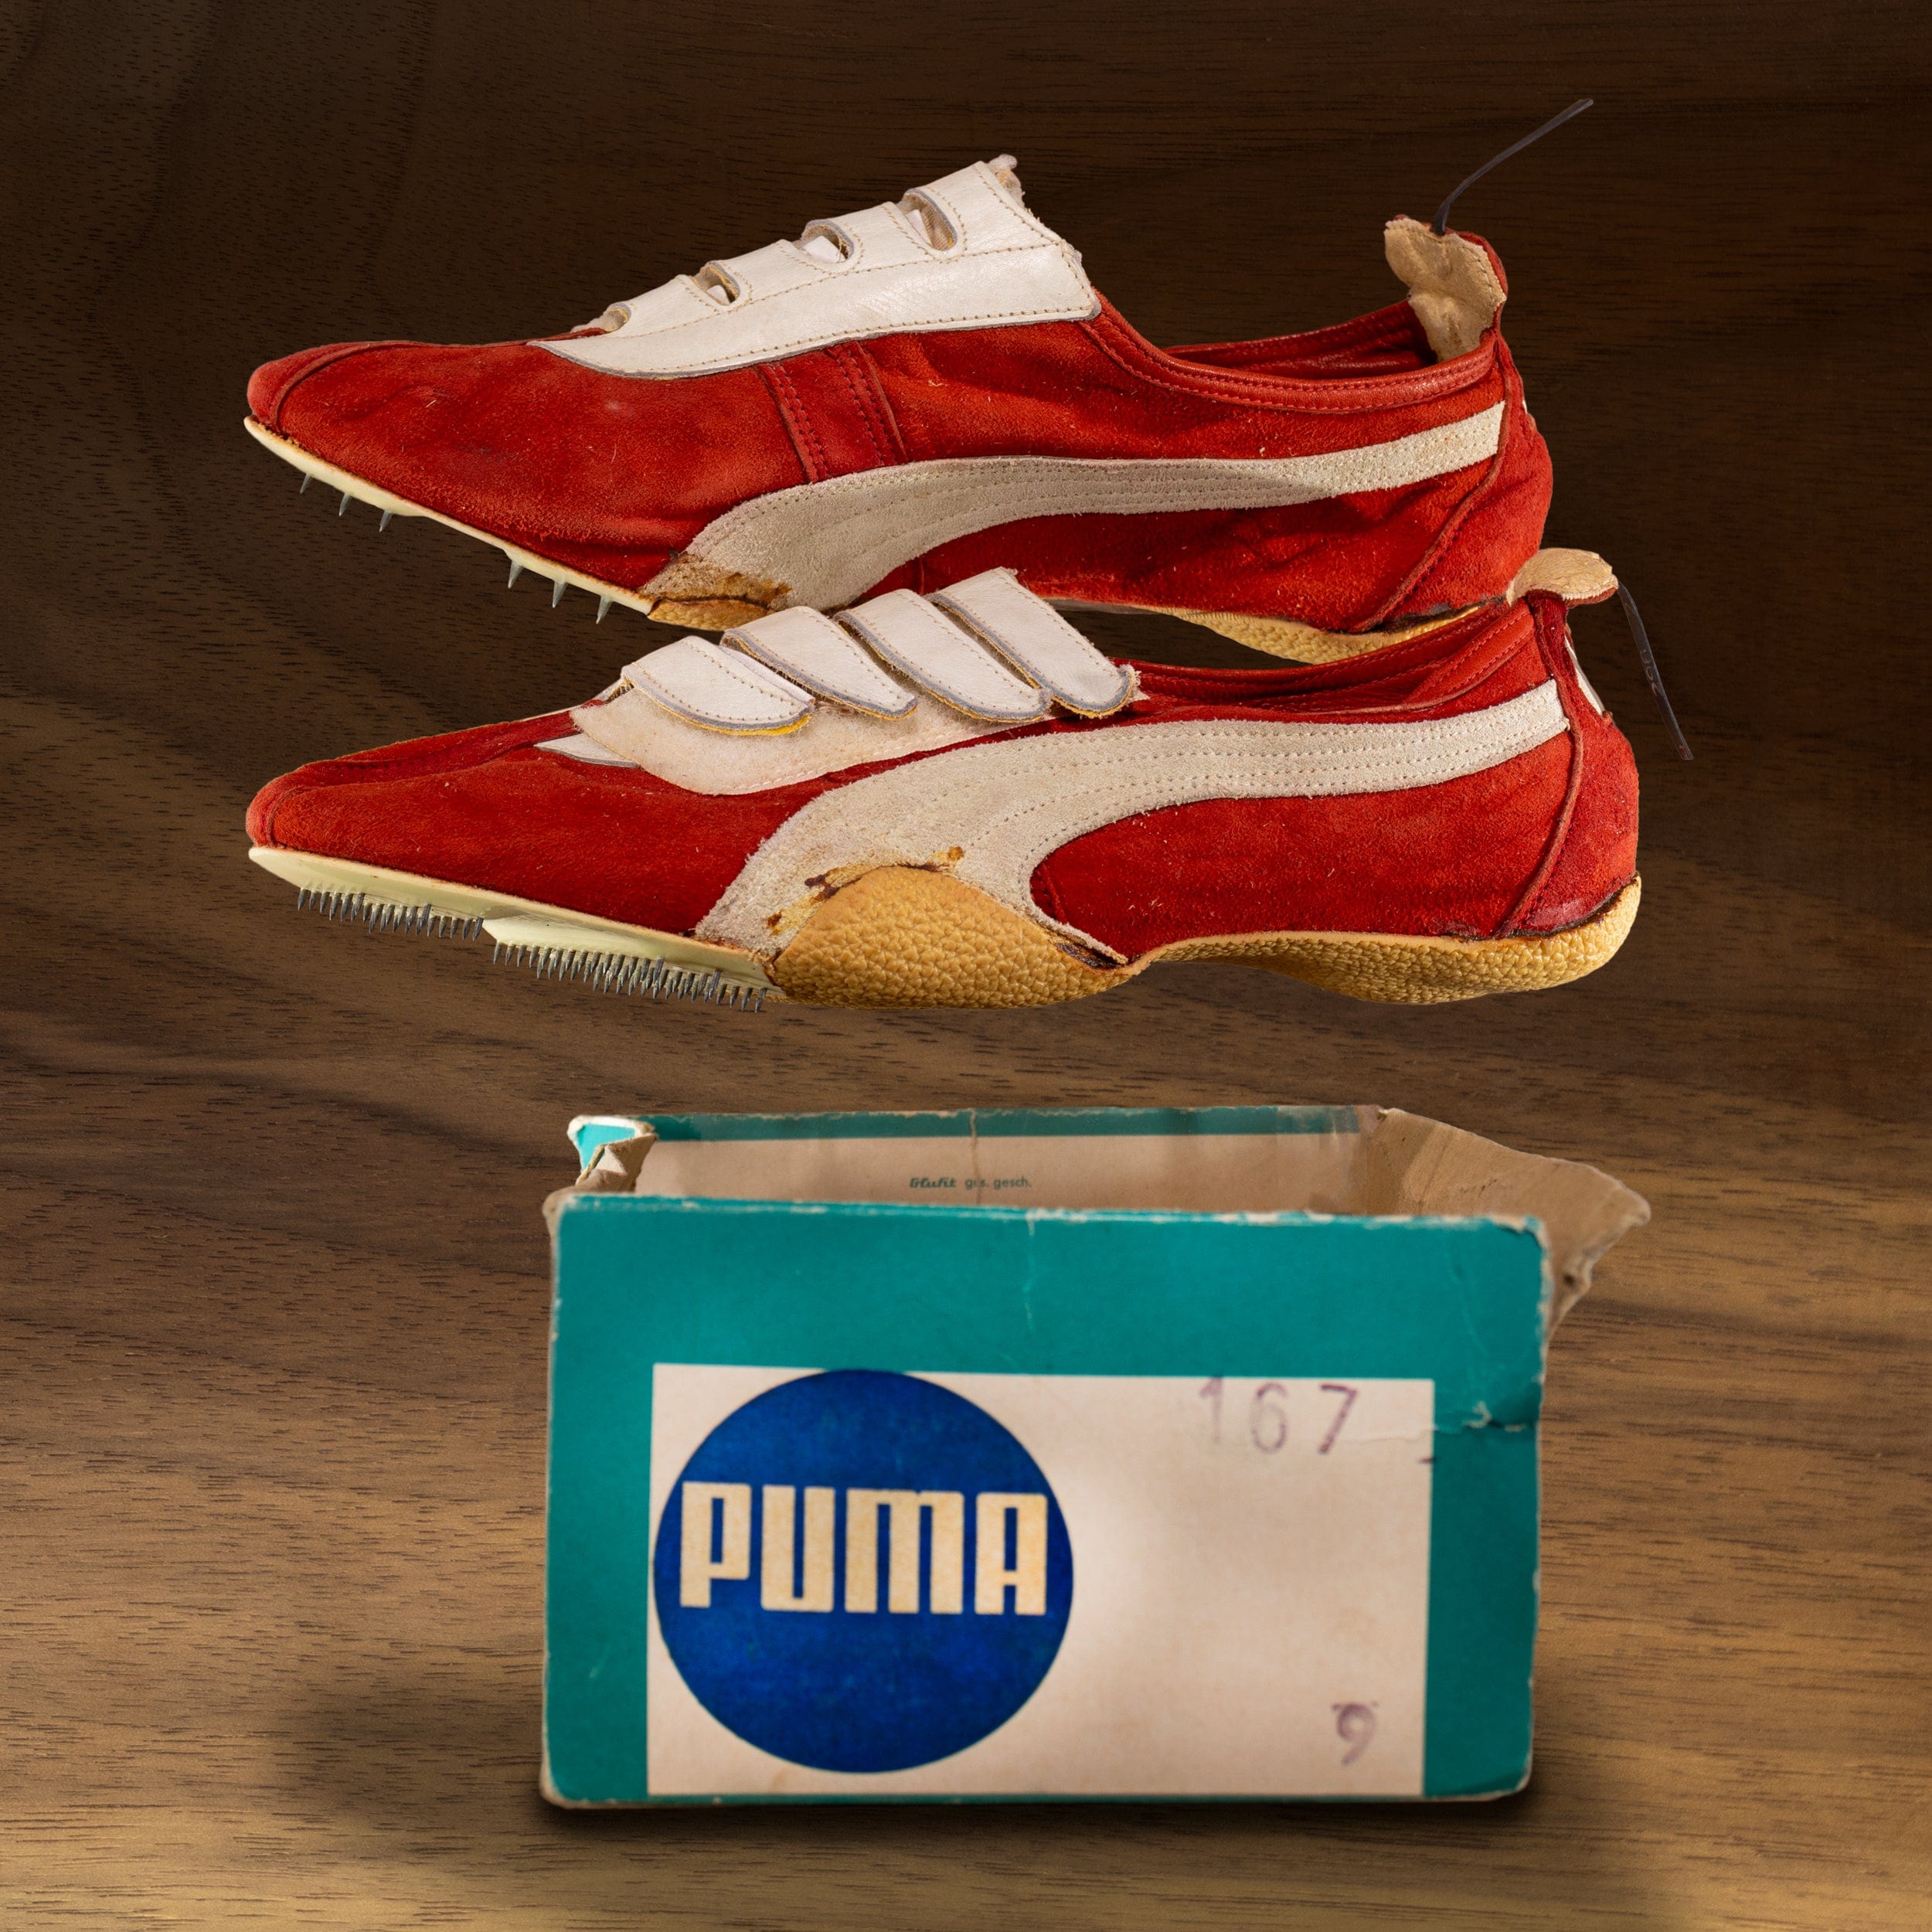 How Much Were a Pair of Puma Sneakers in 1968?